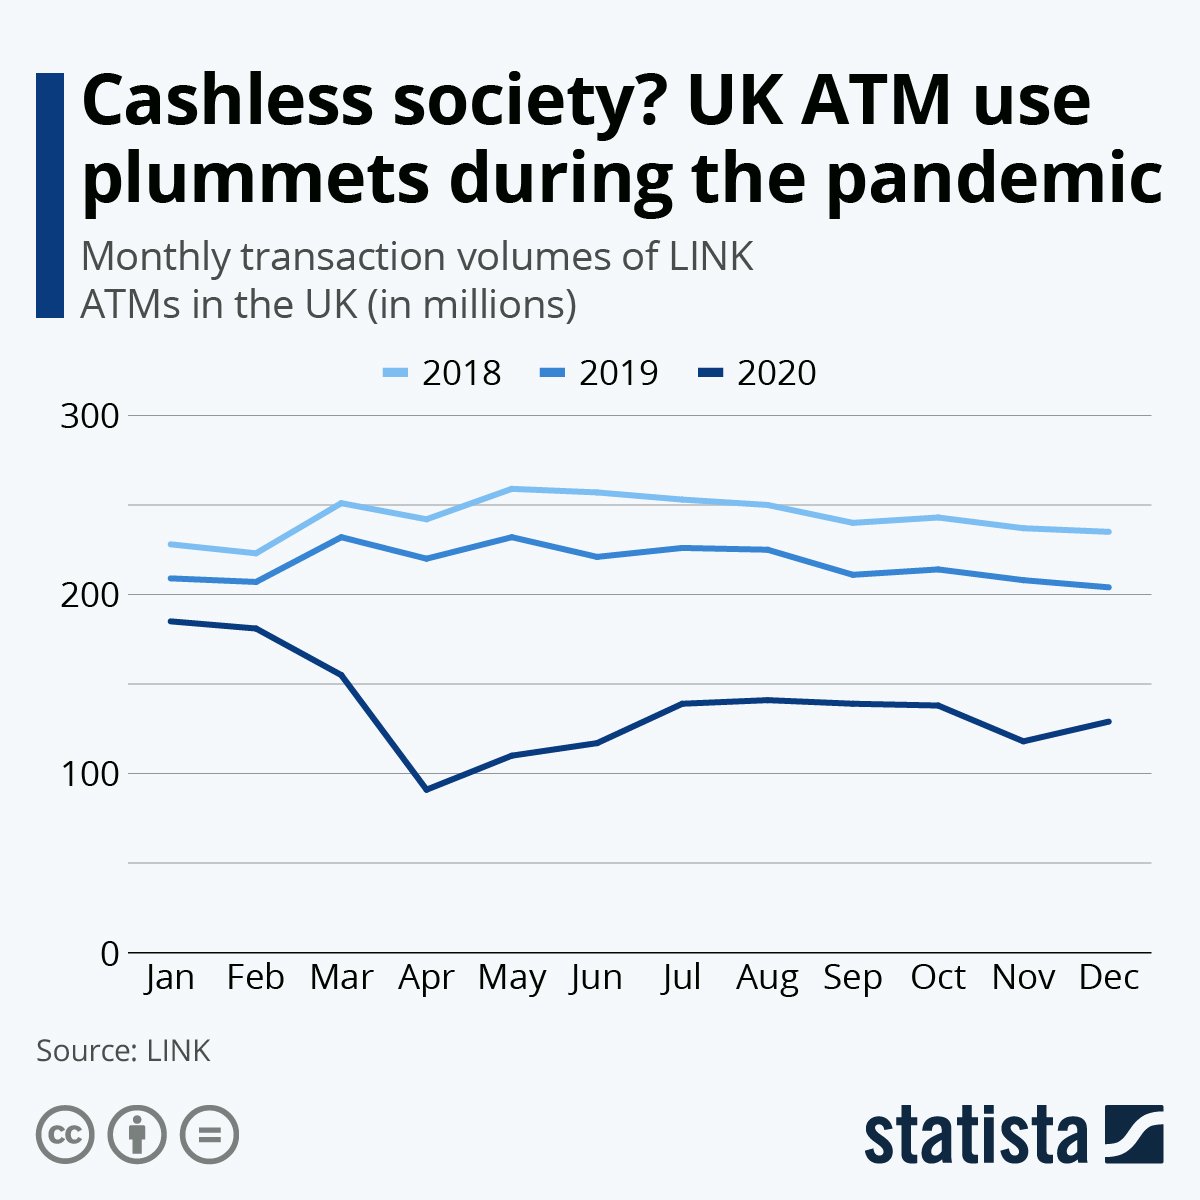 Going towards a cashless society?